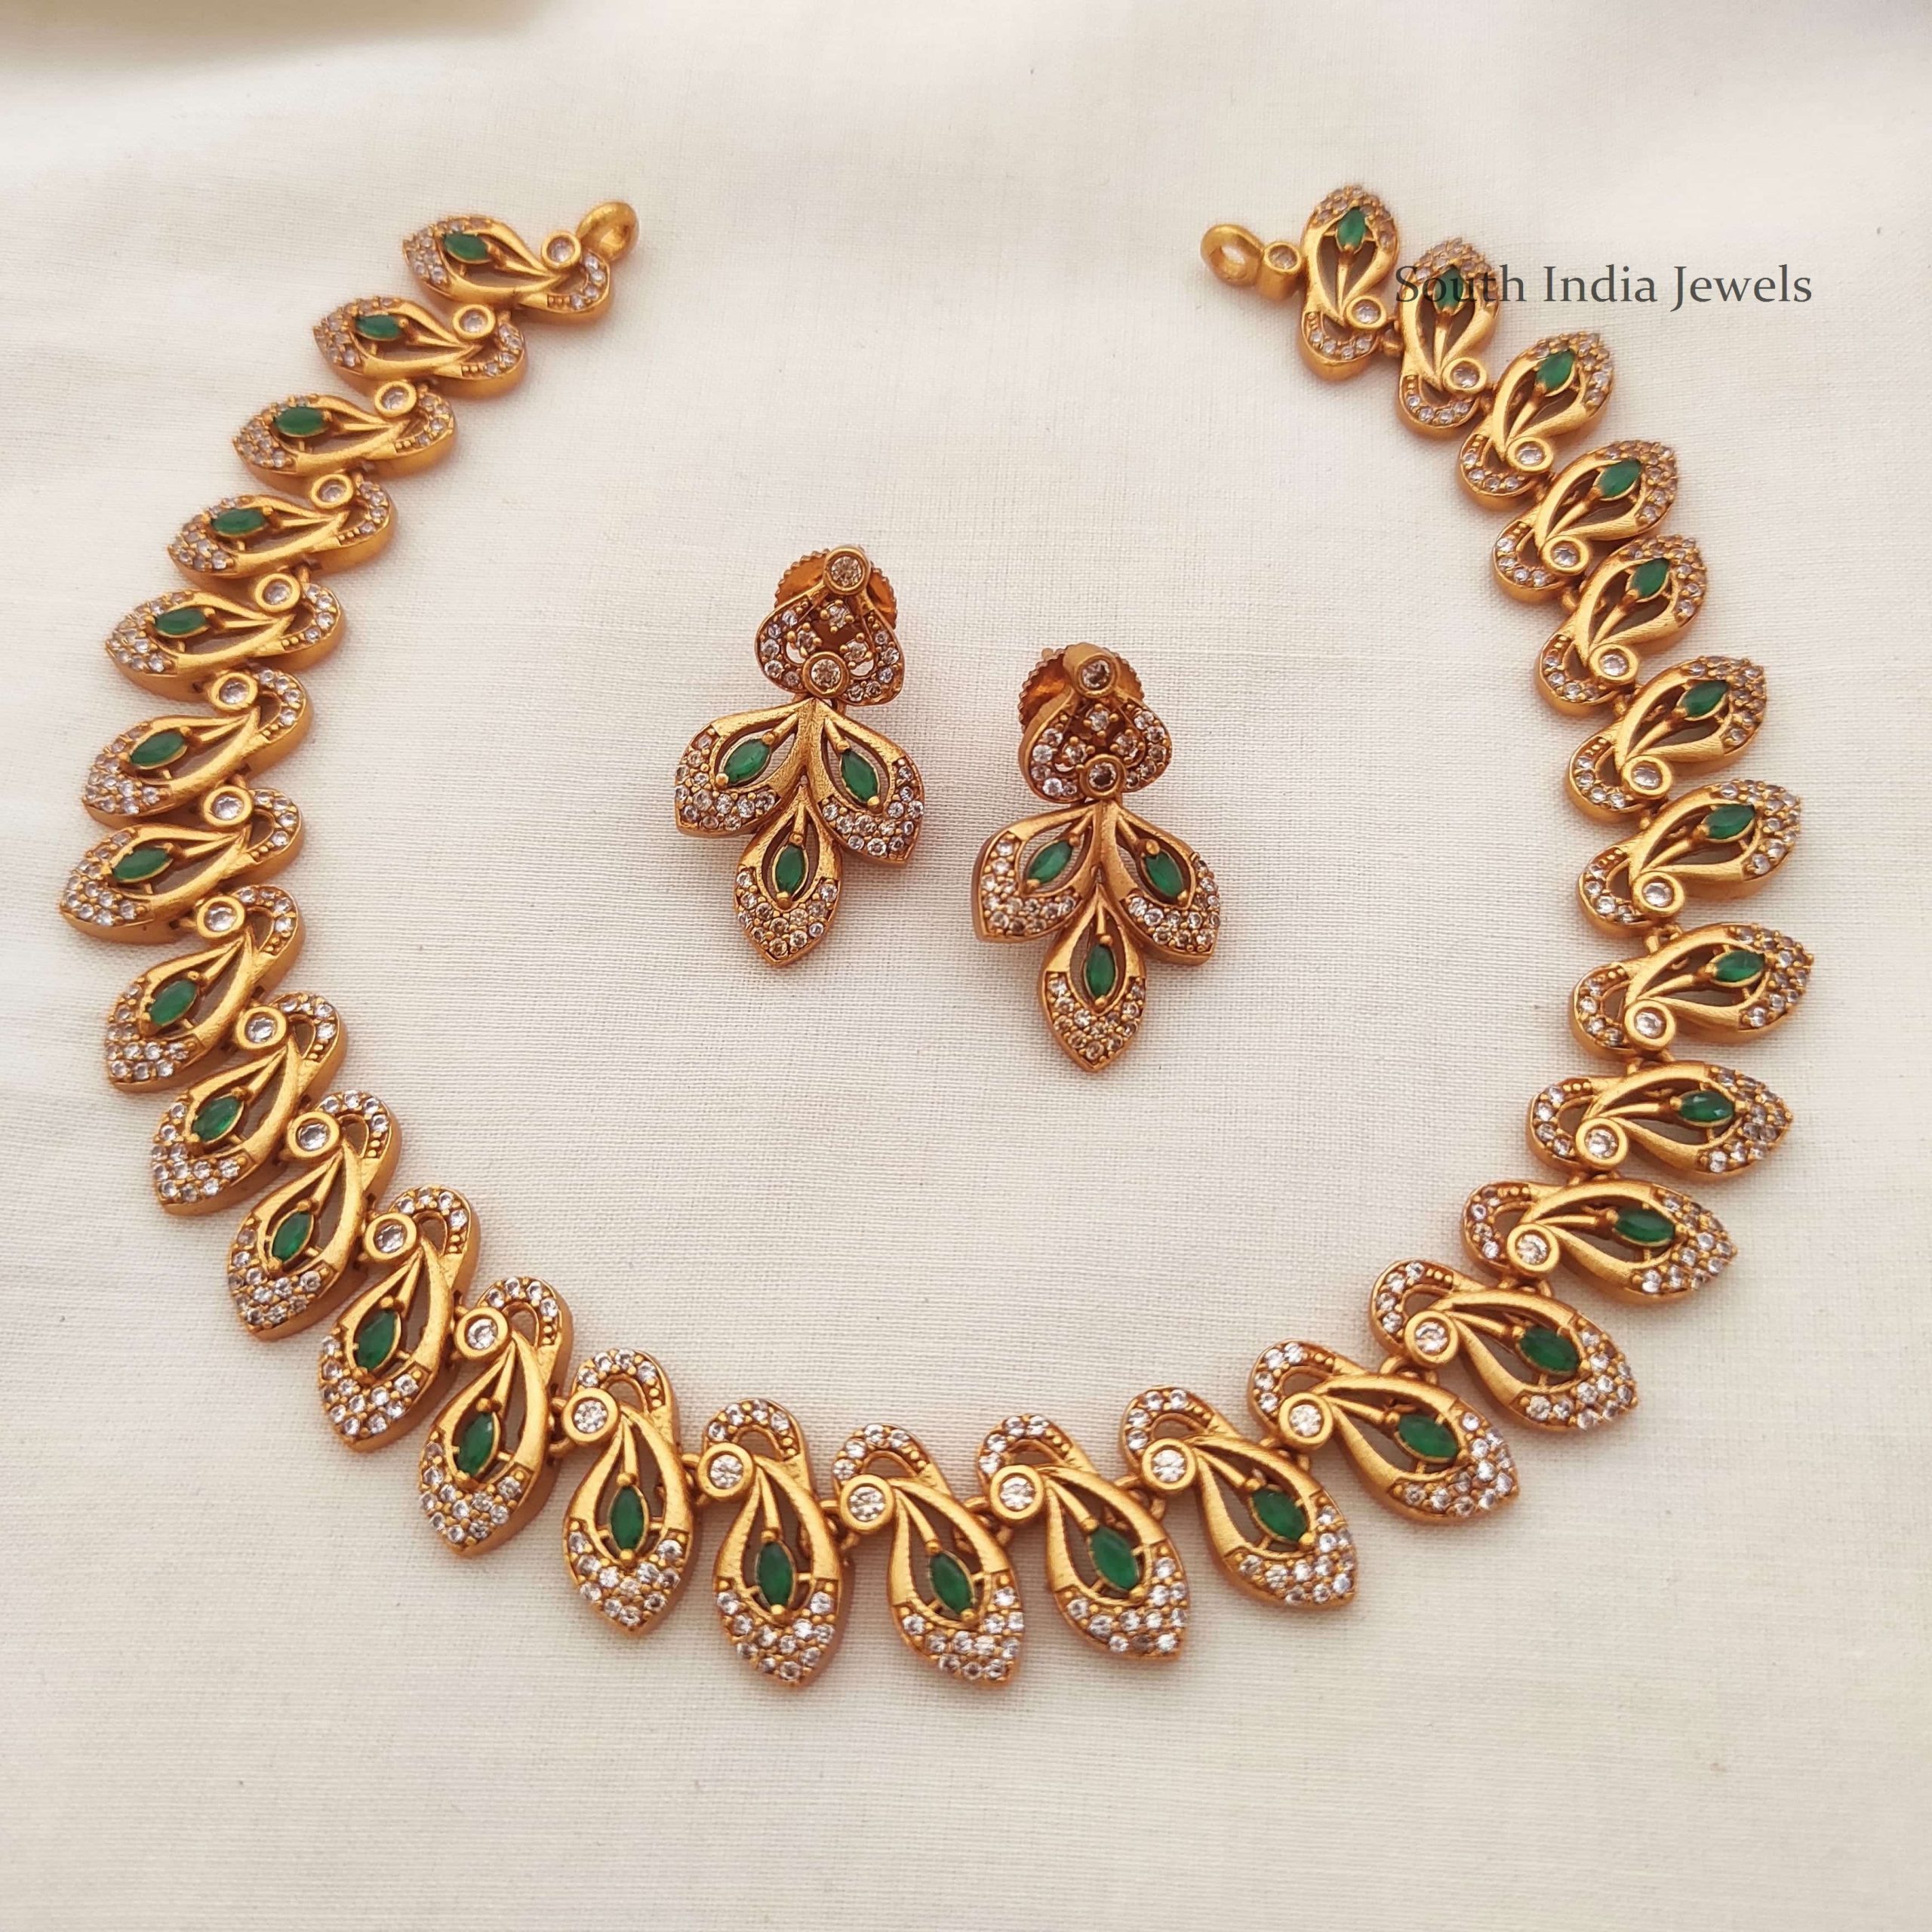 Gold Simple Chain Design | Green Stone Necklace | South India Jewels